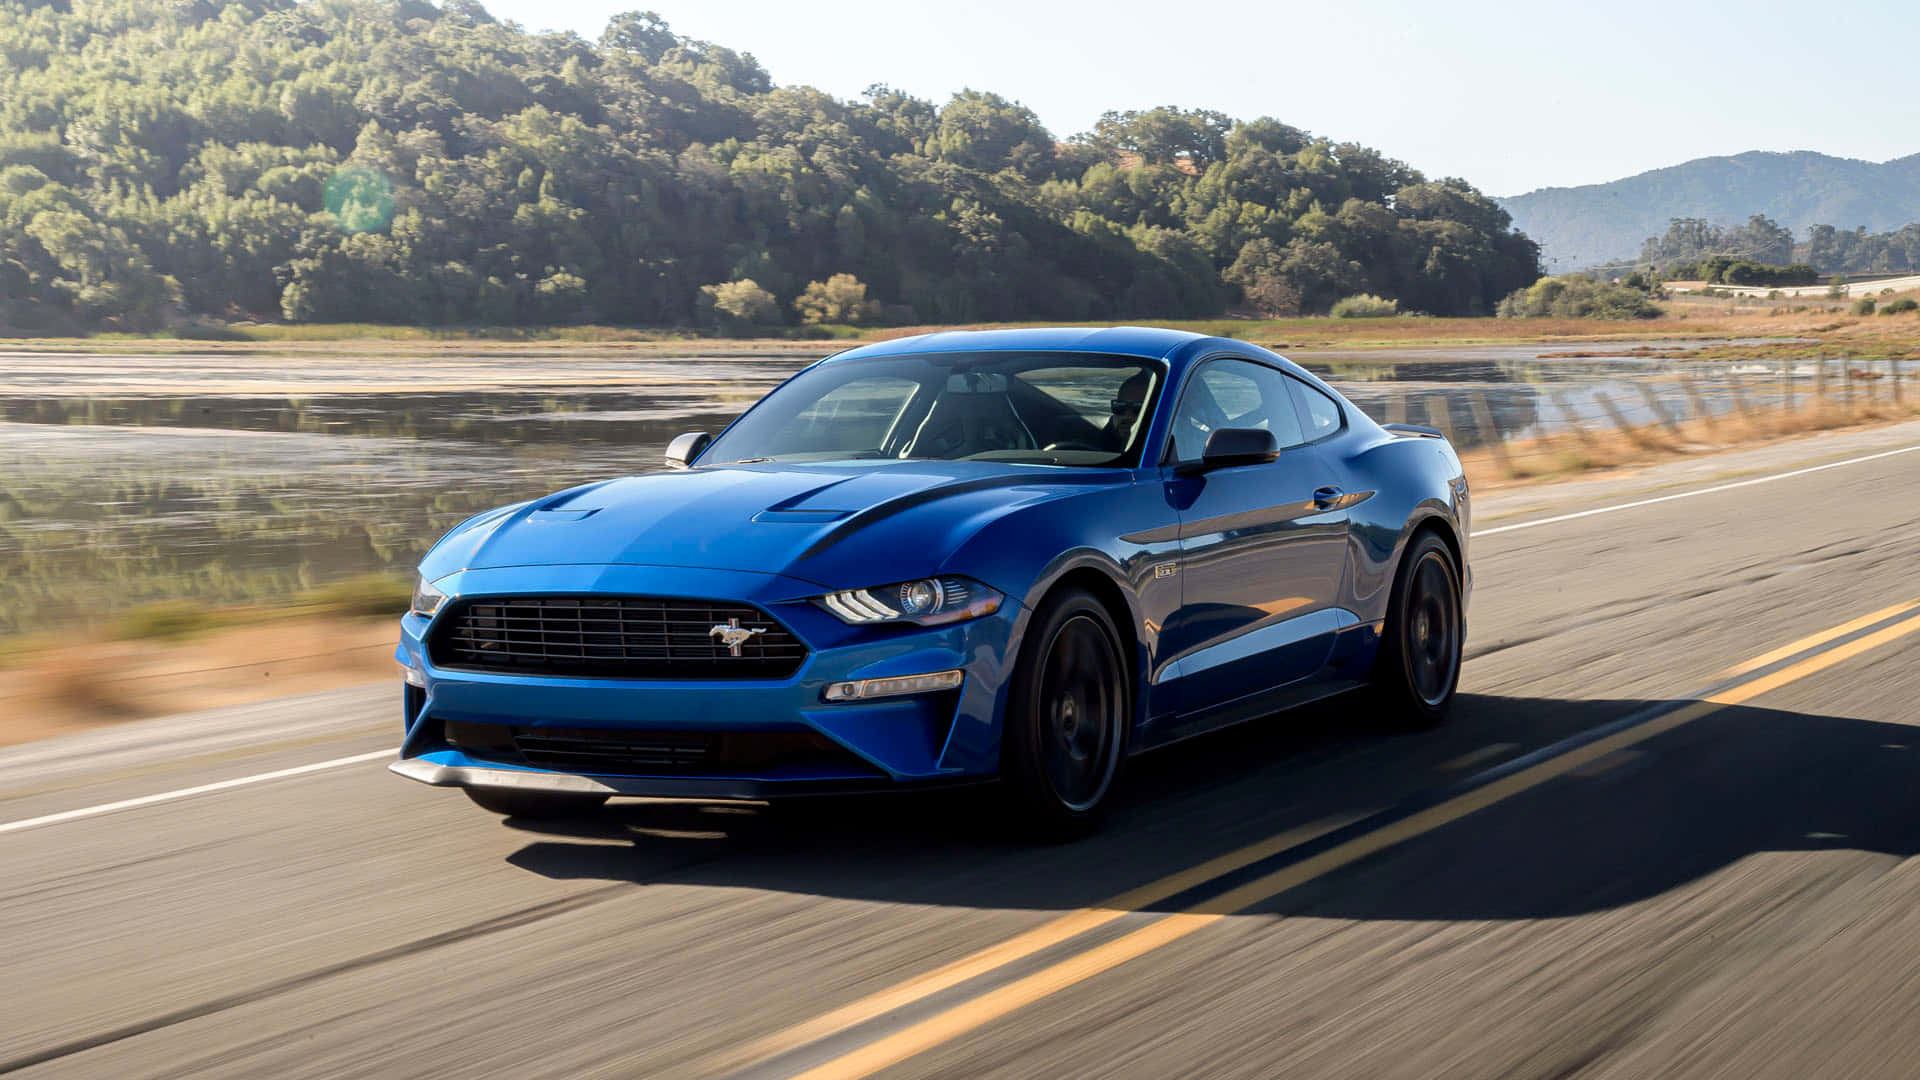 Sleek Ford Mustang Ecoboost on the road Wallpaper